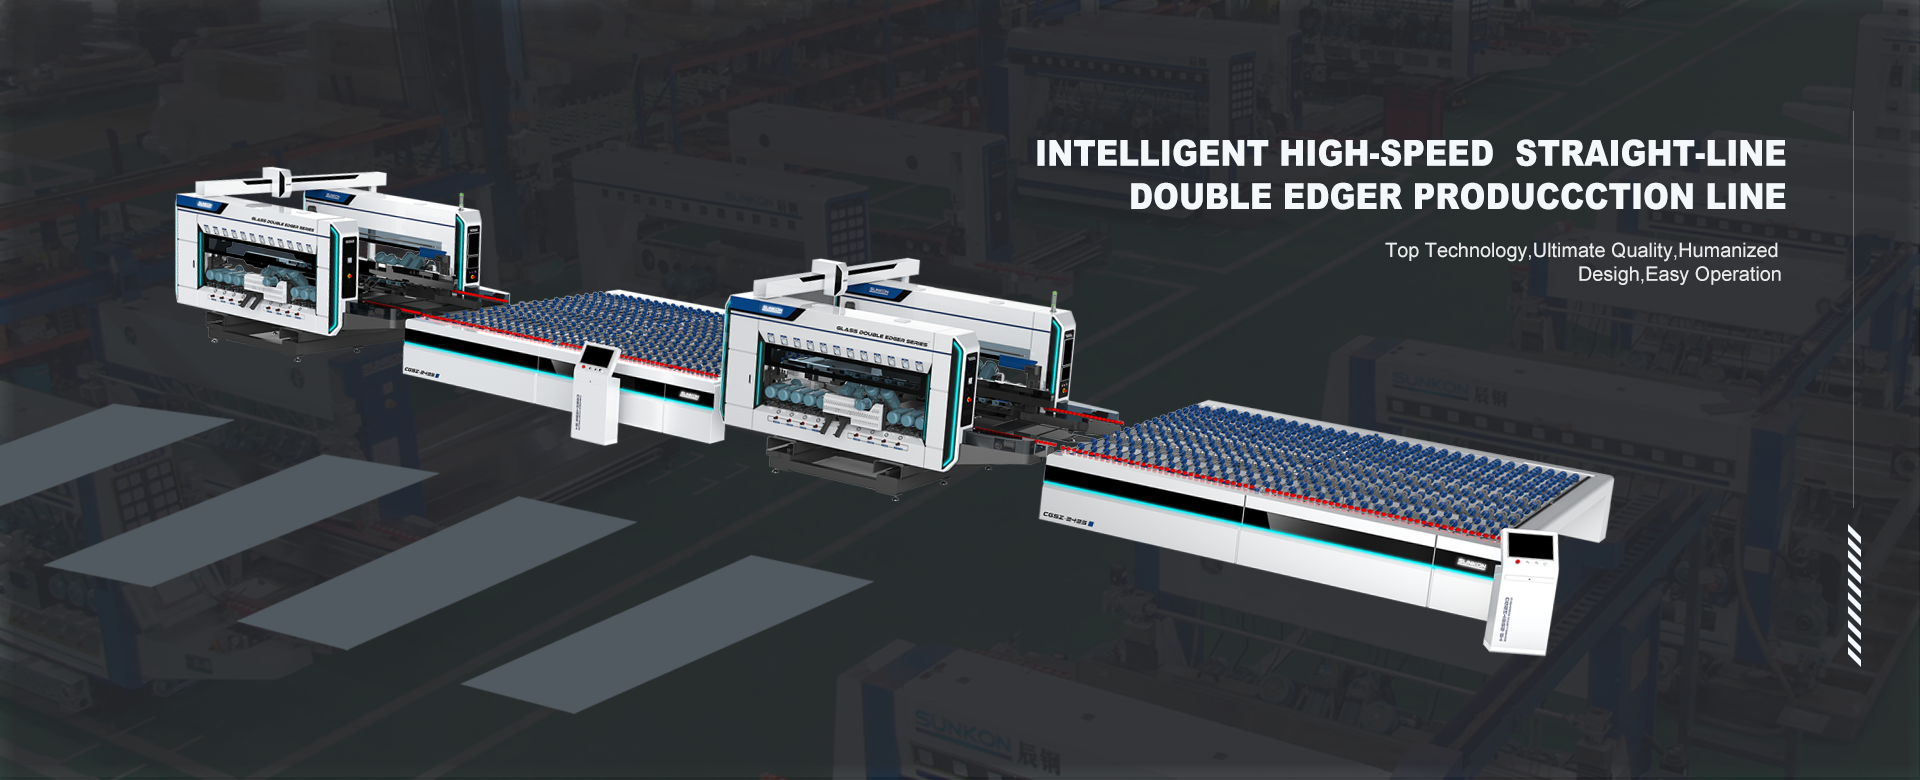 Intelligent High-Speed Straight-Line Double Edger Production Line